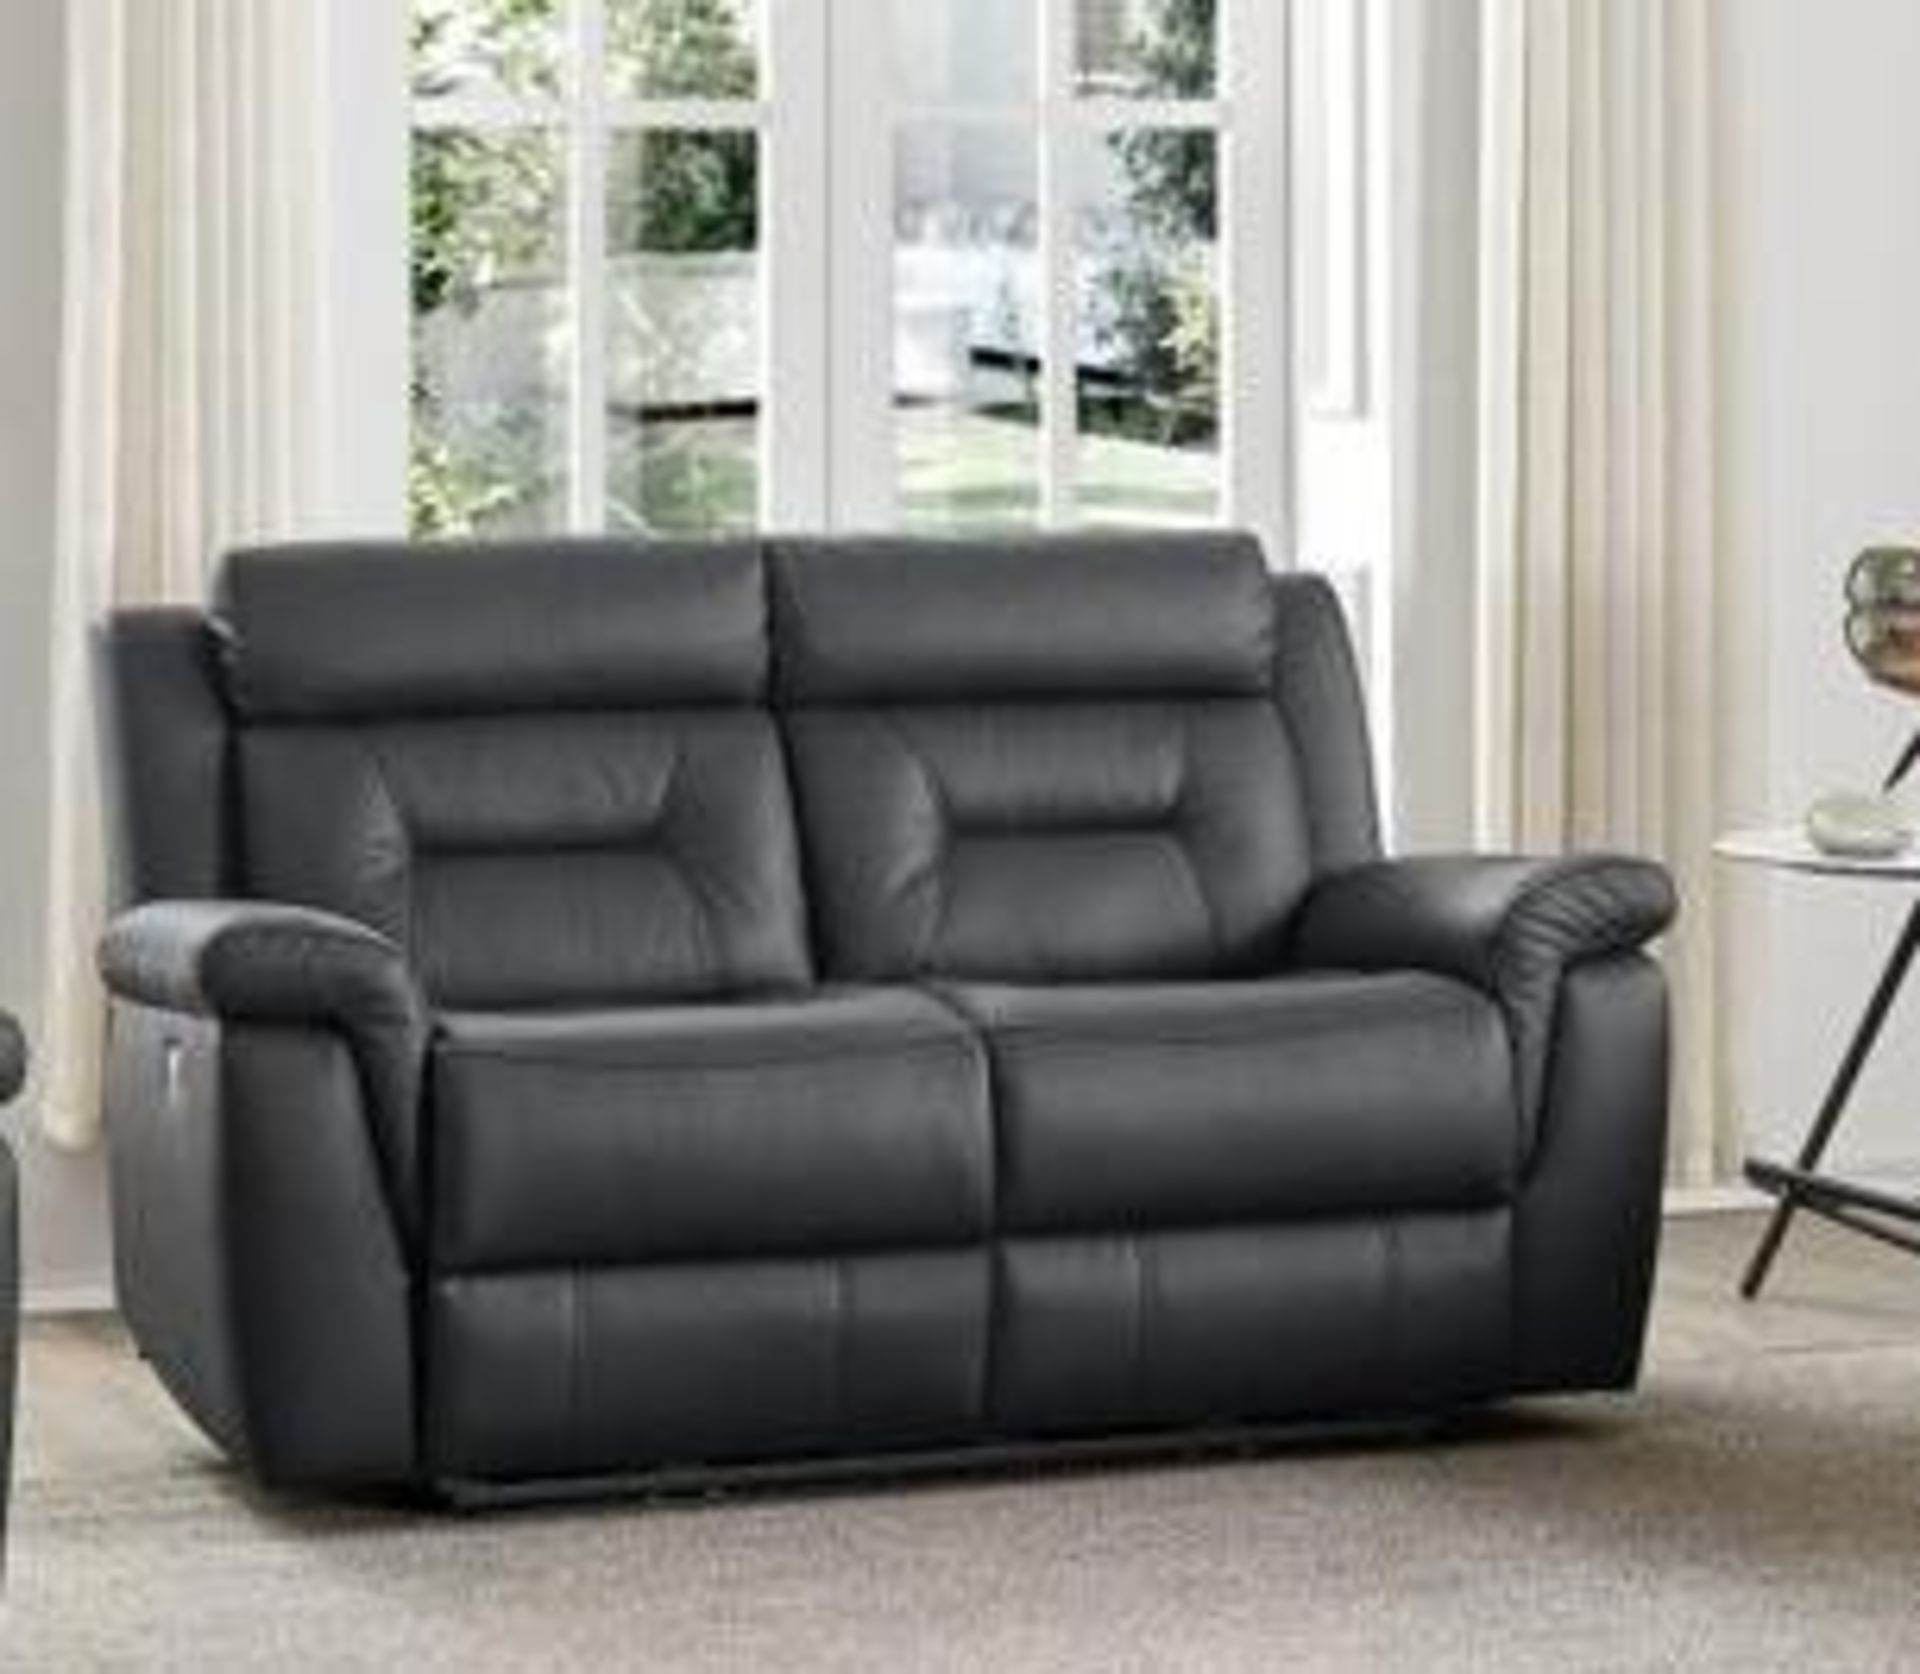 *BRAND NEW* Milano Leather Electric Recliner Collection 3 + 2 in Black. - Image 3 of 3